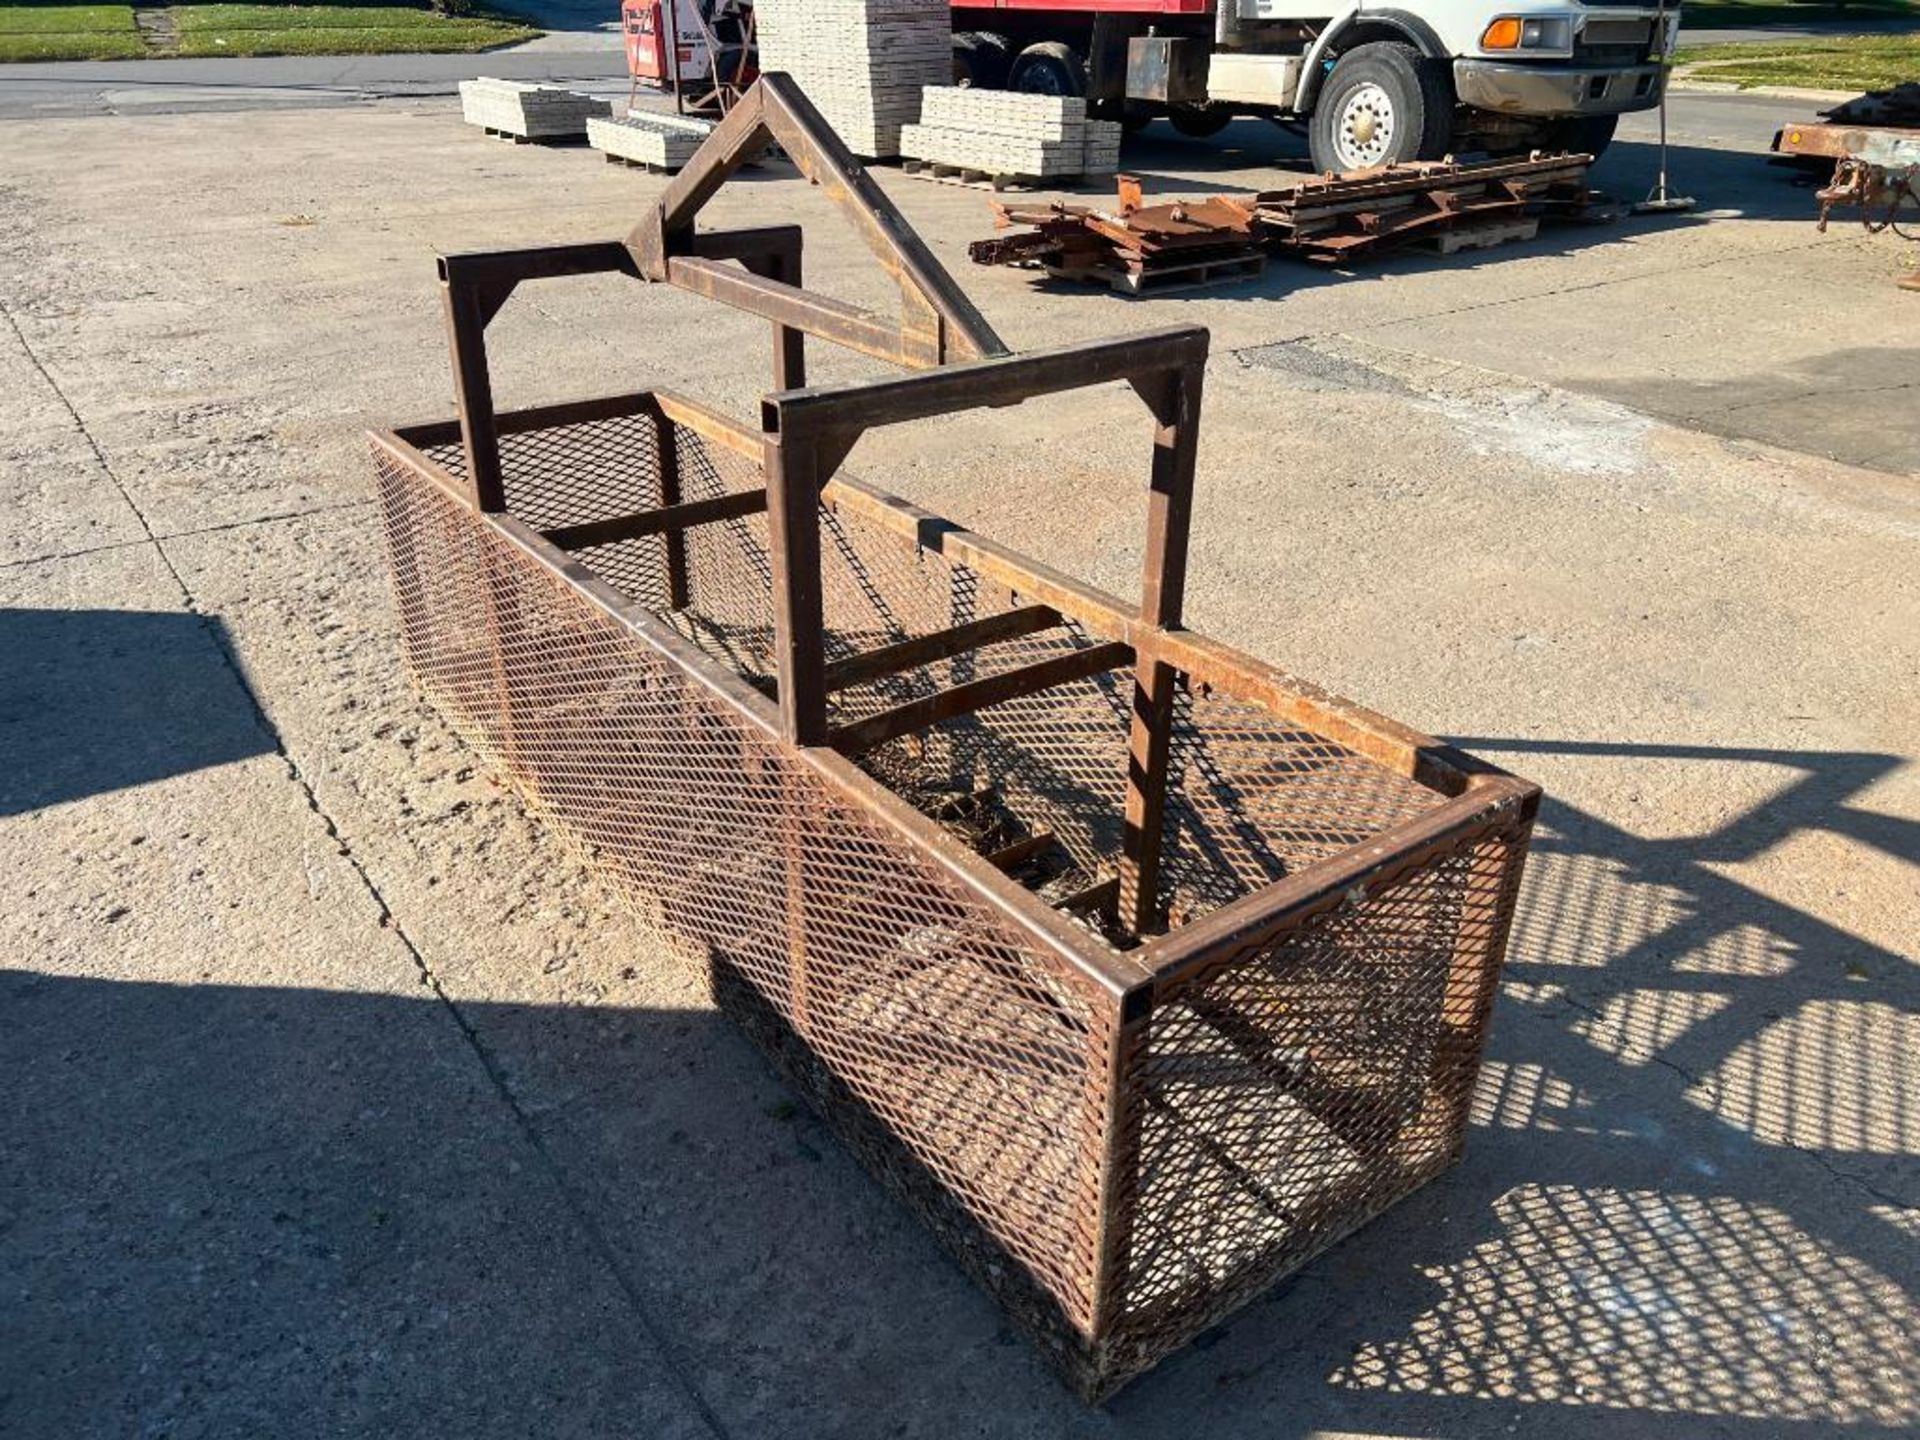 5' x 8' x 28" Form Basket. Located in Mt. Pleasant, IA - Image 2 of 4